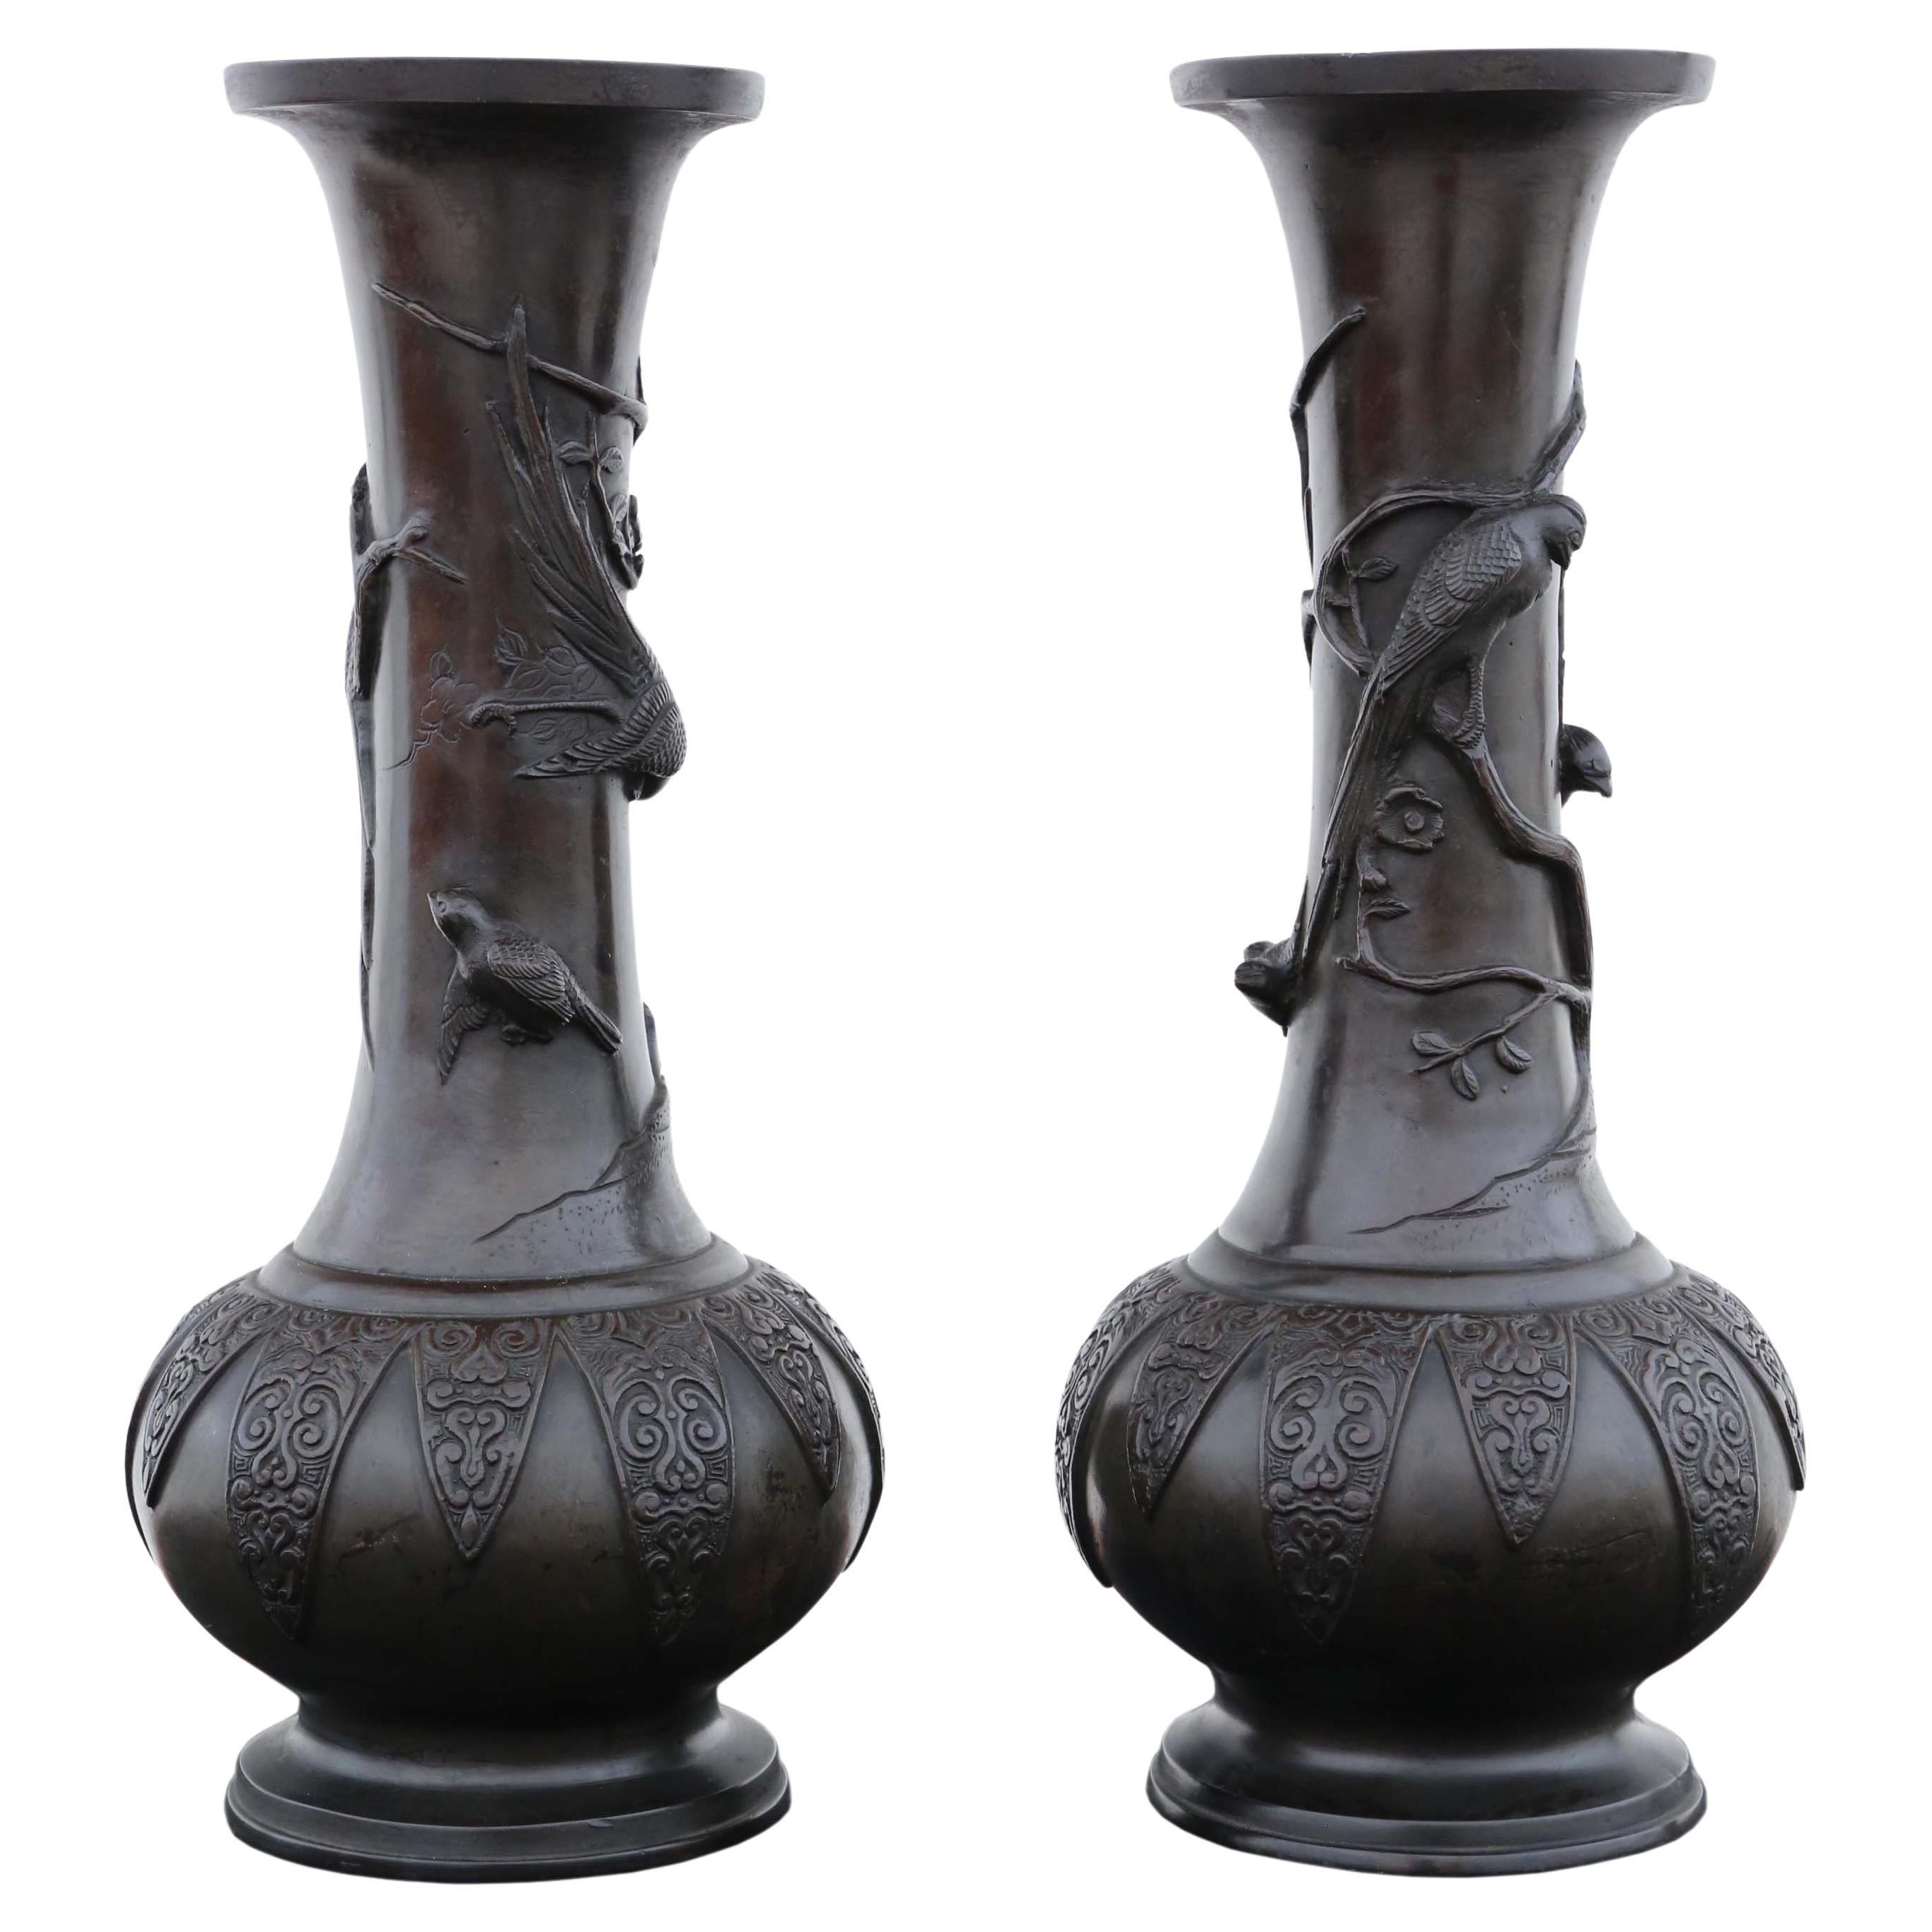 Antique Very Large Pair of Japanese Bronze Vases - 19th Century Meiji Period For Sale